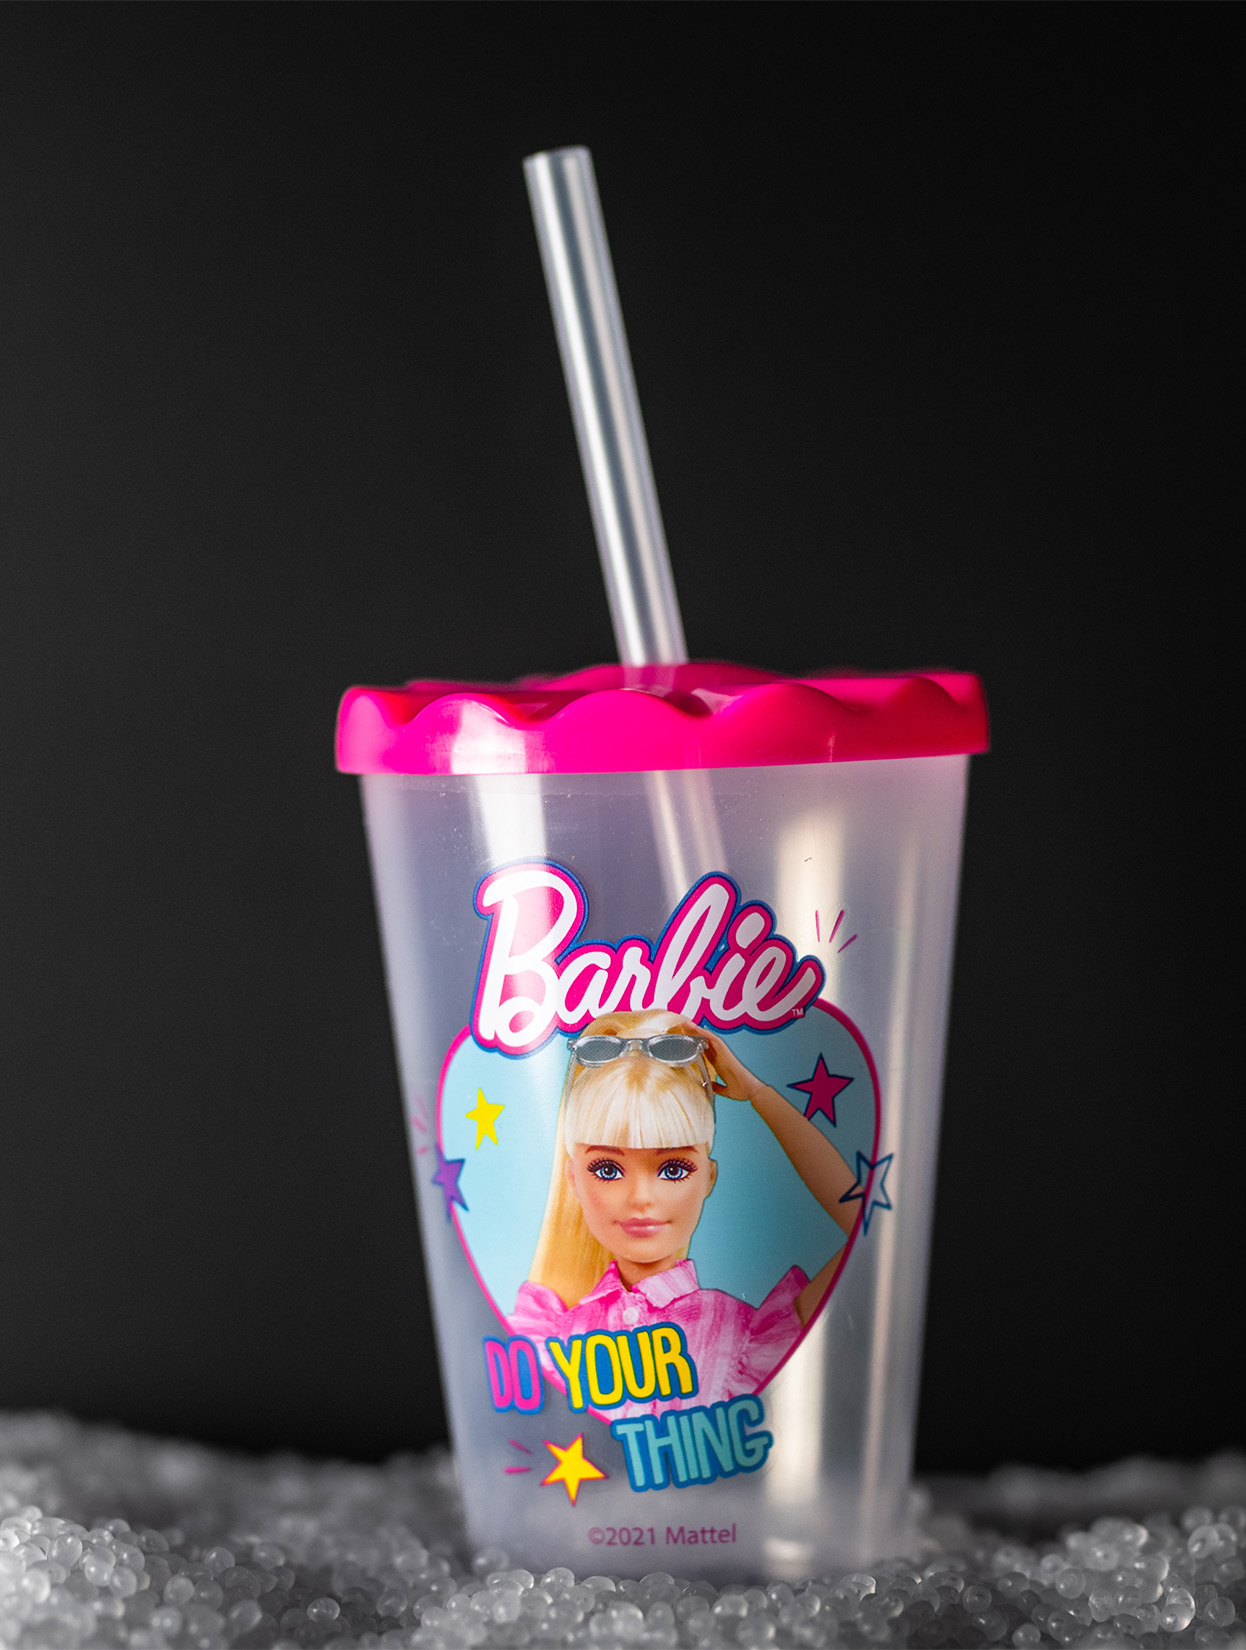 Sustainable desiagn globetrade. Barbie, do your thing, drinking cup. Made by recycled plastics